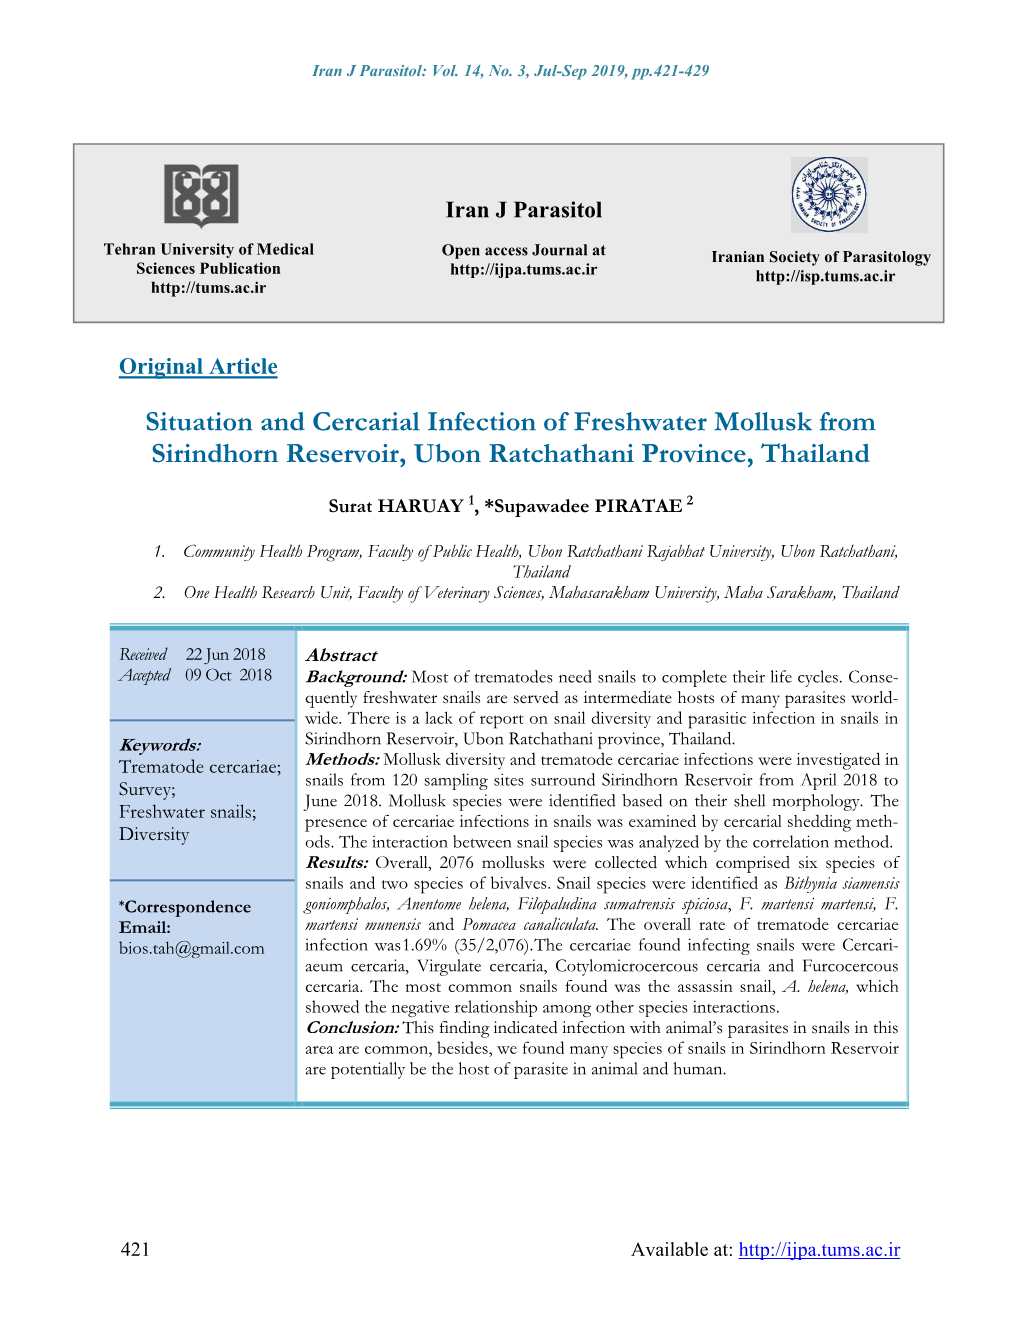 Situation and Cercarial Infection of Freshwater Mollusk from Sirindhorn Reservoir, Ubon Ratchathani Province, Thailand